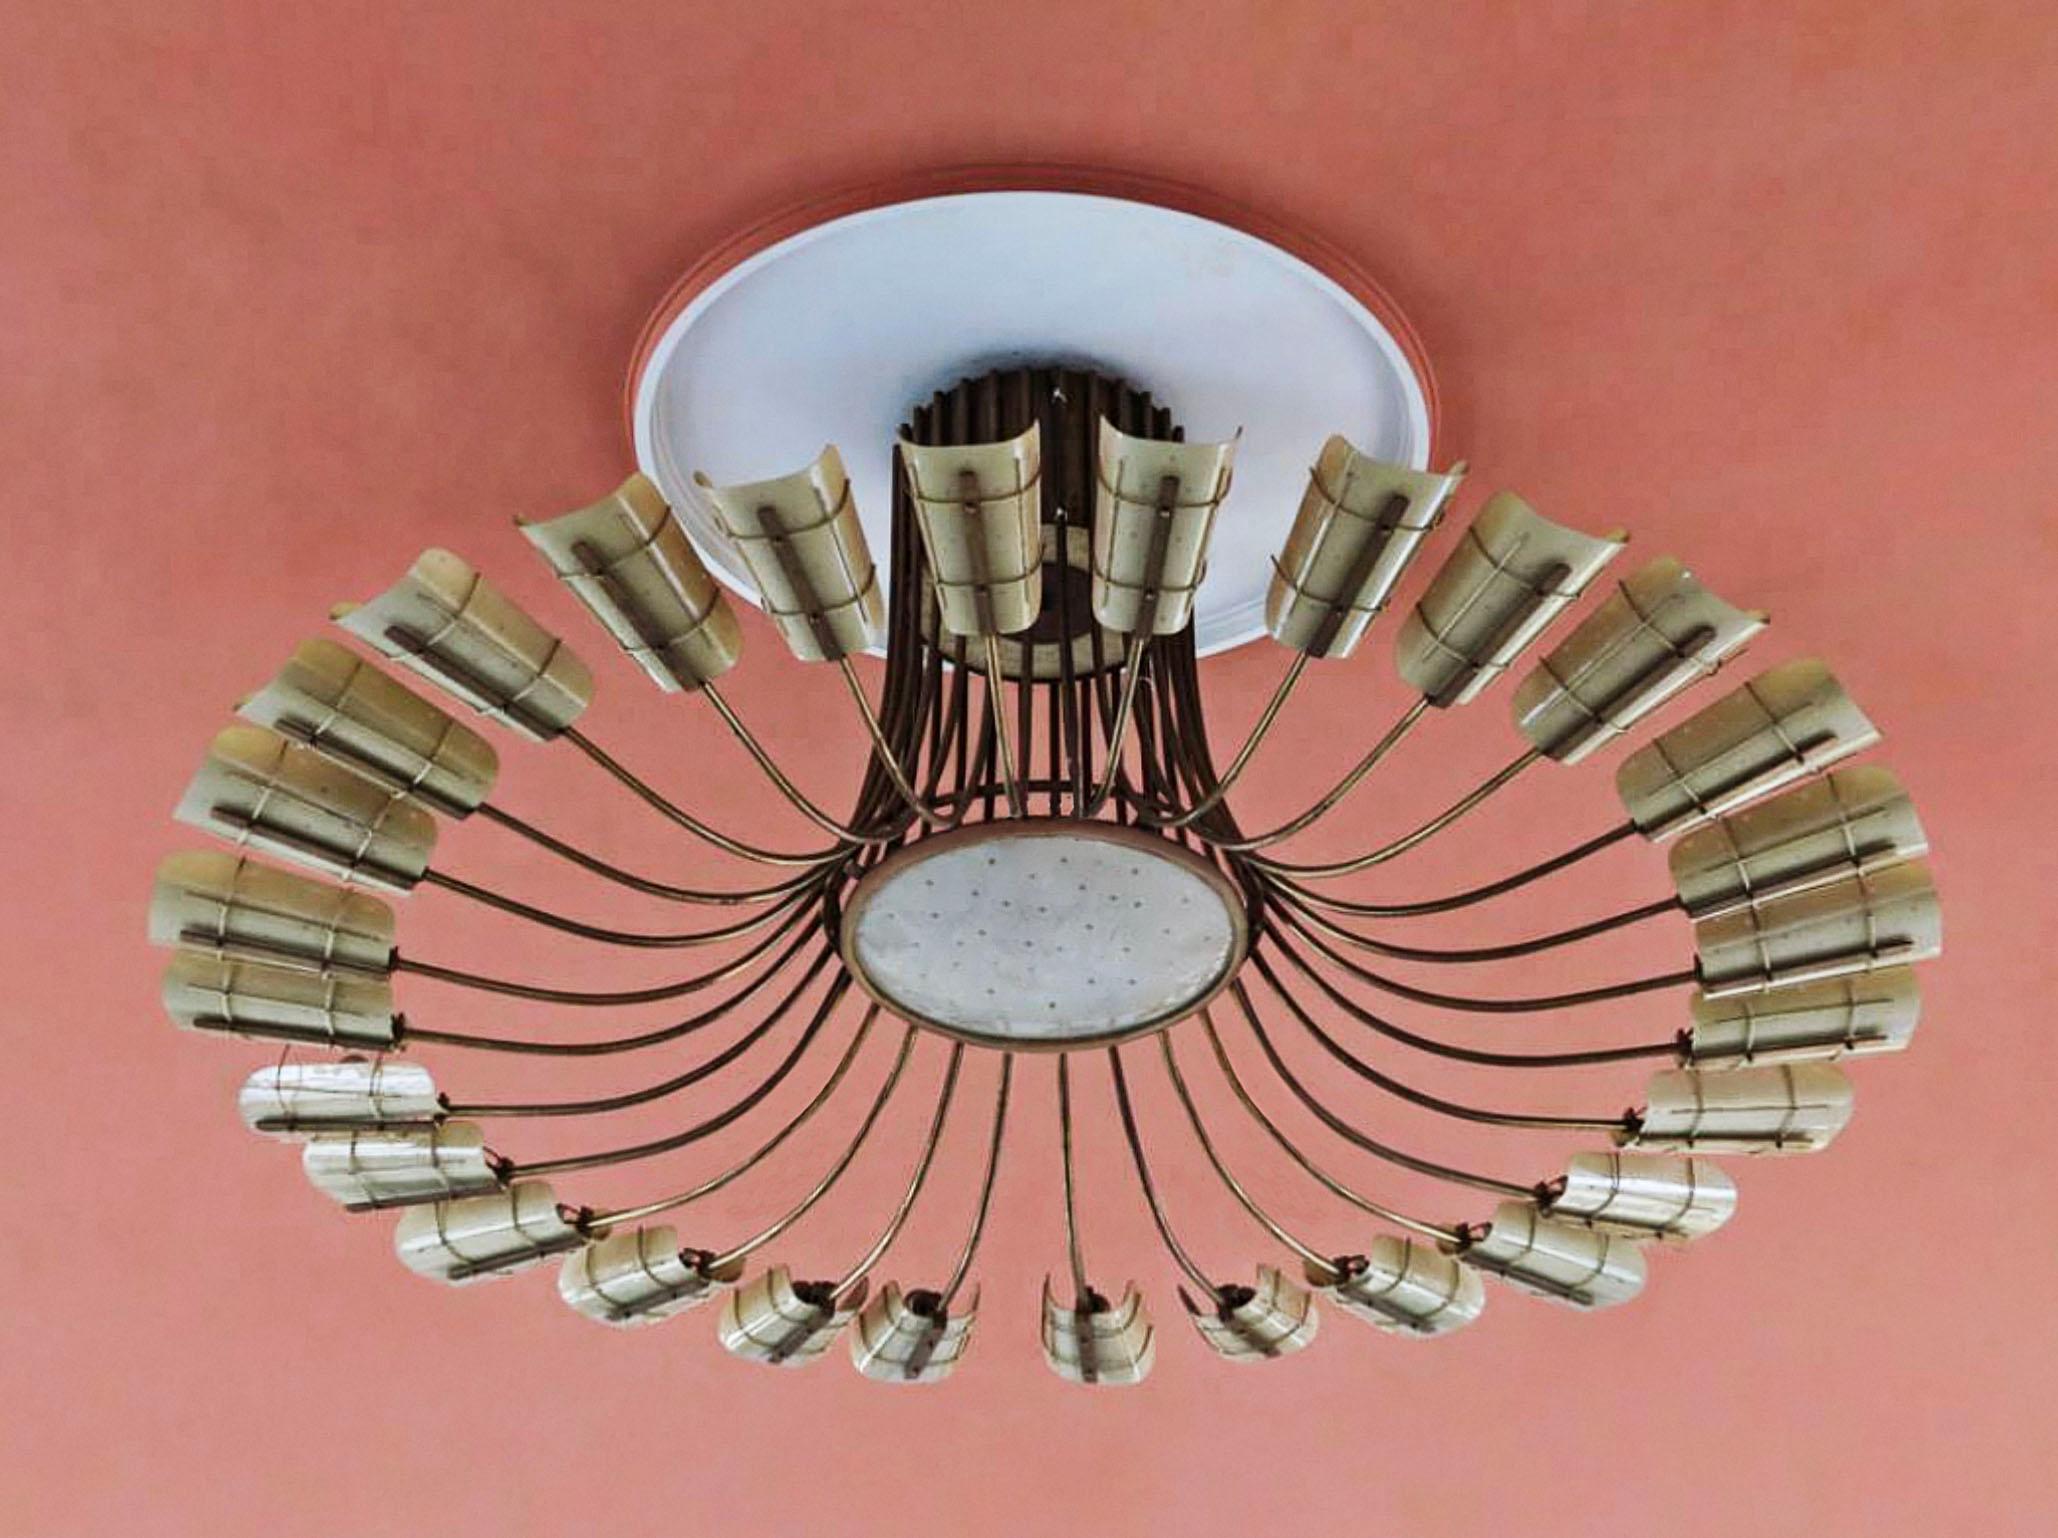 Extraordinary huge ballroom chandelier in brass with glass shades.
The chandelier is an one of a kind production from the 1950s.

To be on the safe side, the lamp should be checked locally by a specialist concerning local requirements.